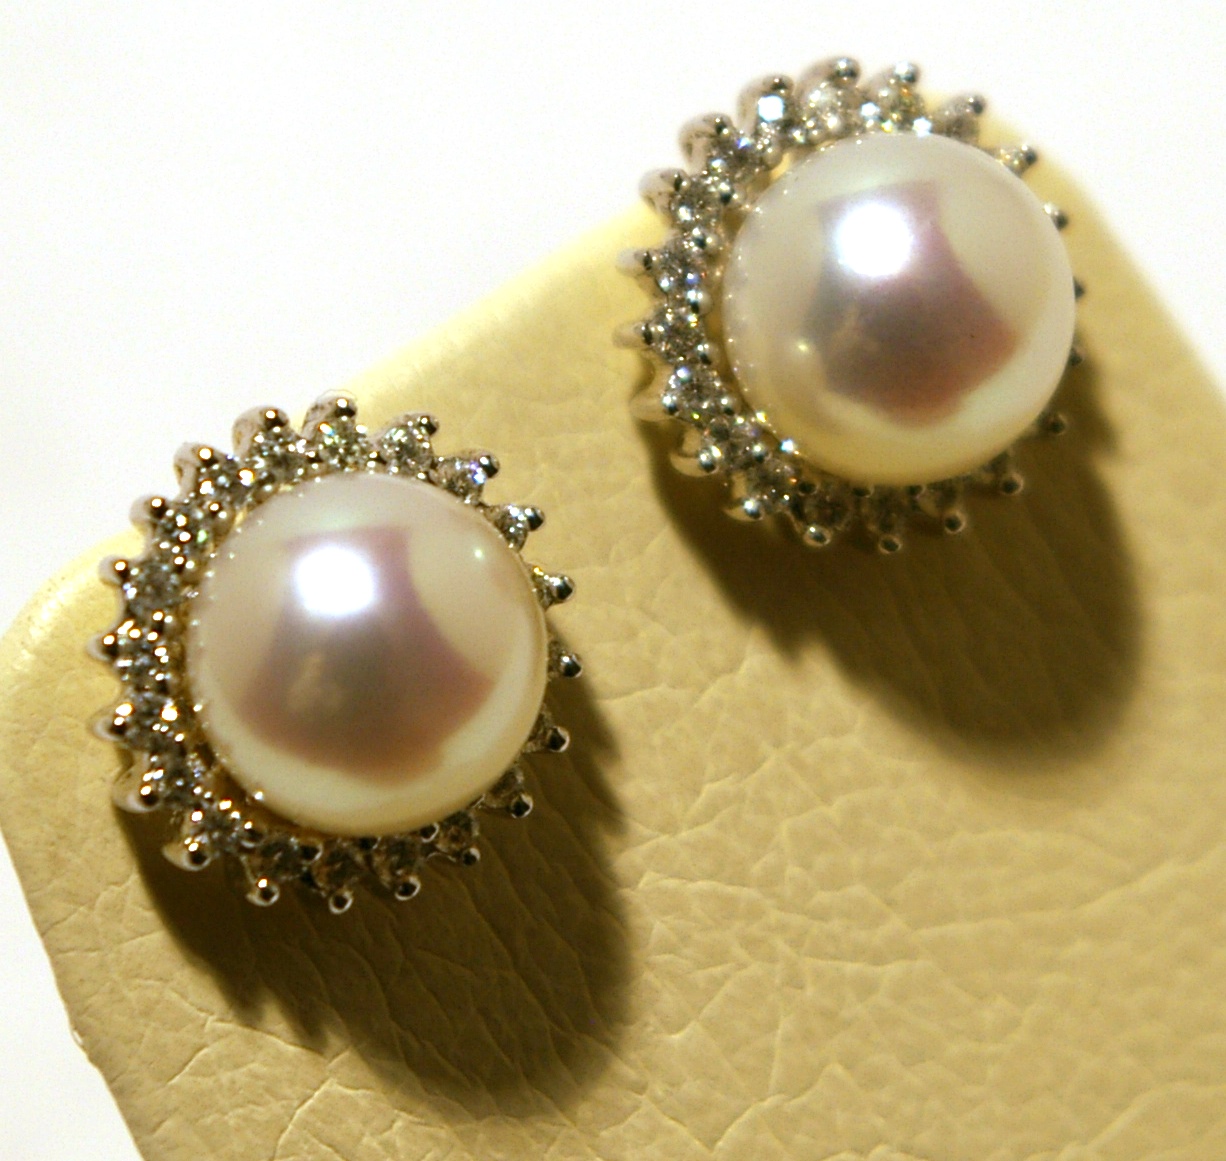 5mm cultured Pearl and Diamond Surround Stud Earrings in 18ct White Gold